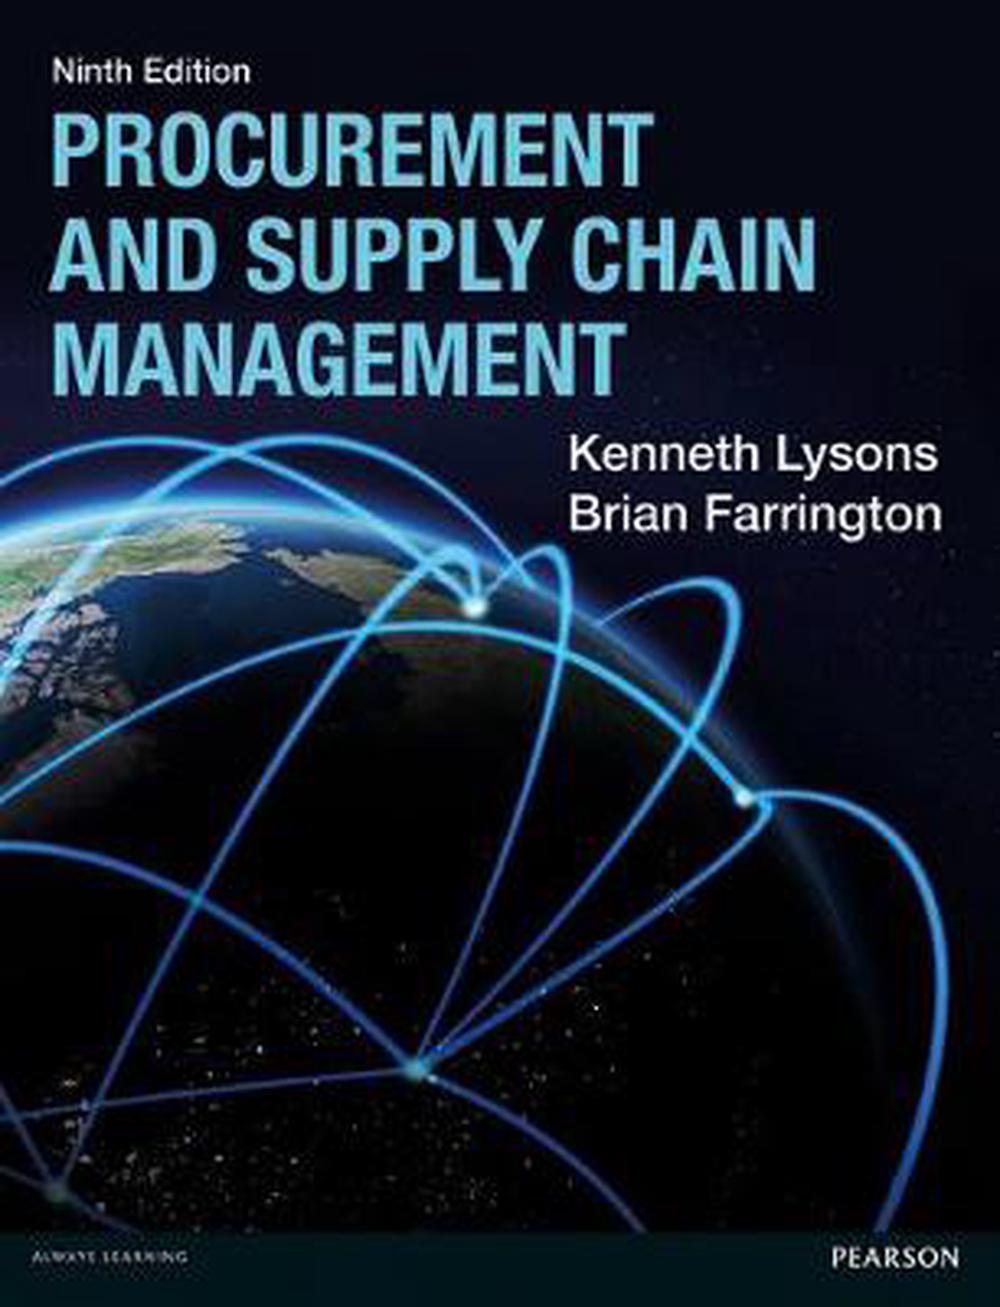 research topics in purchasing and supply chain management